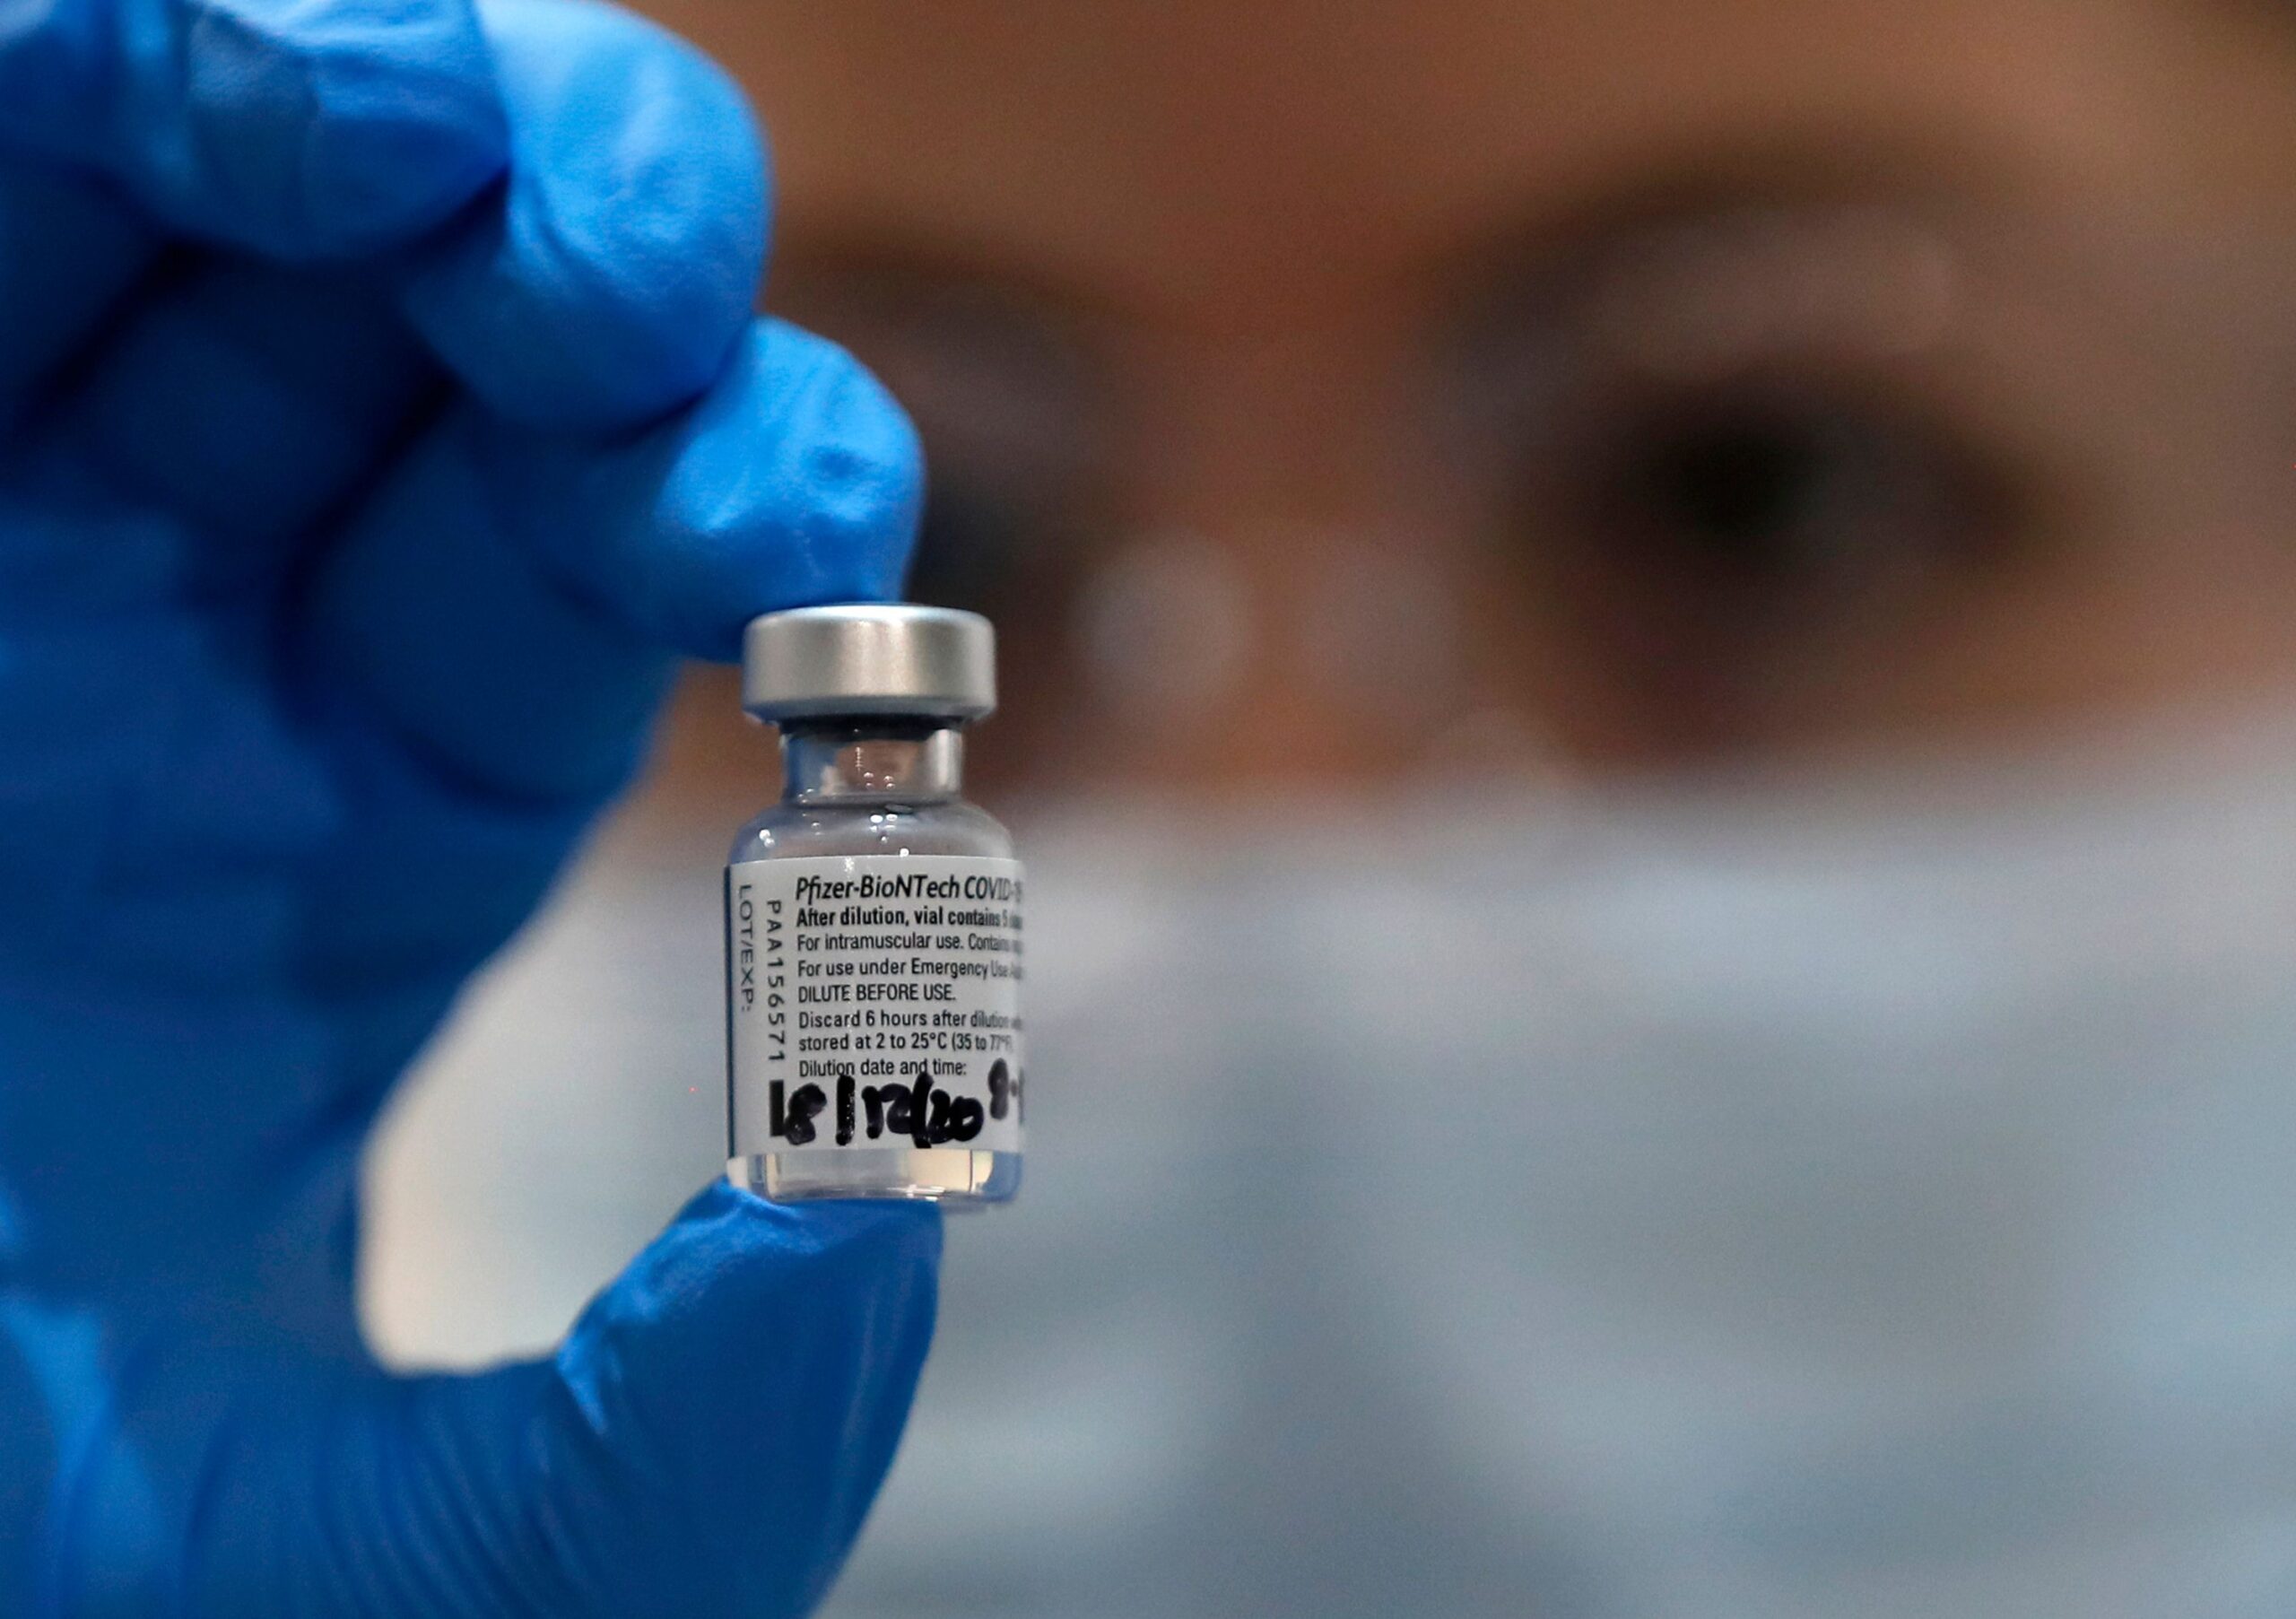 US pilots and air traffic controllers can now take the Pfizer vaccine